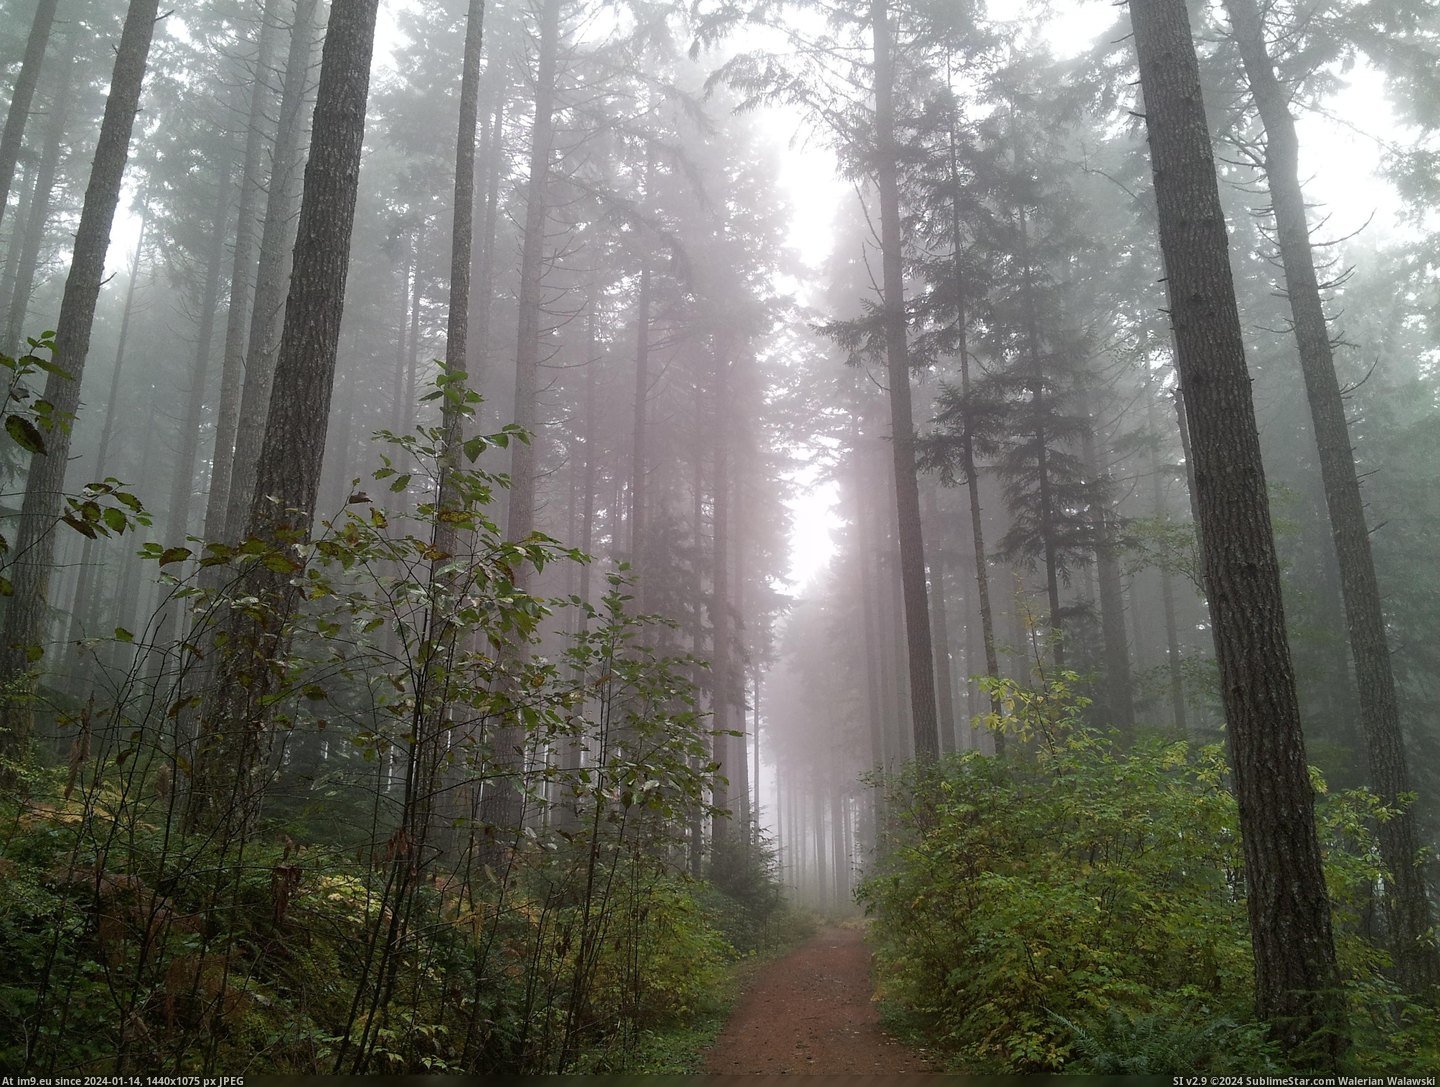 #Photo #Day #Wallpaper #Trees #Fog #Foggy #Nanaimo #Forest #Road #3264x2448 [Earthporn] A foggy day along a forest road, Nanaimo, BC. [OC] [3264x2448] Pic. (Image of album My r/EARTHPORN favs))